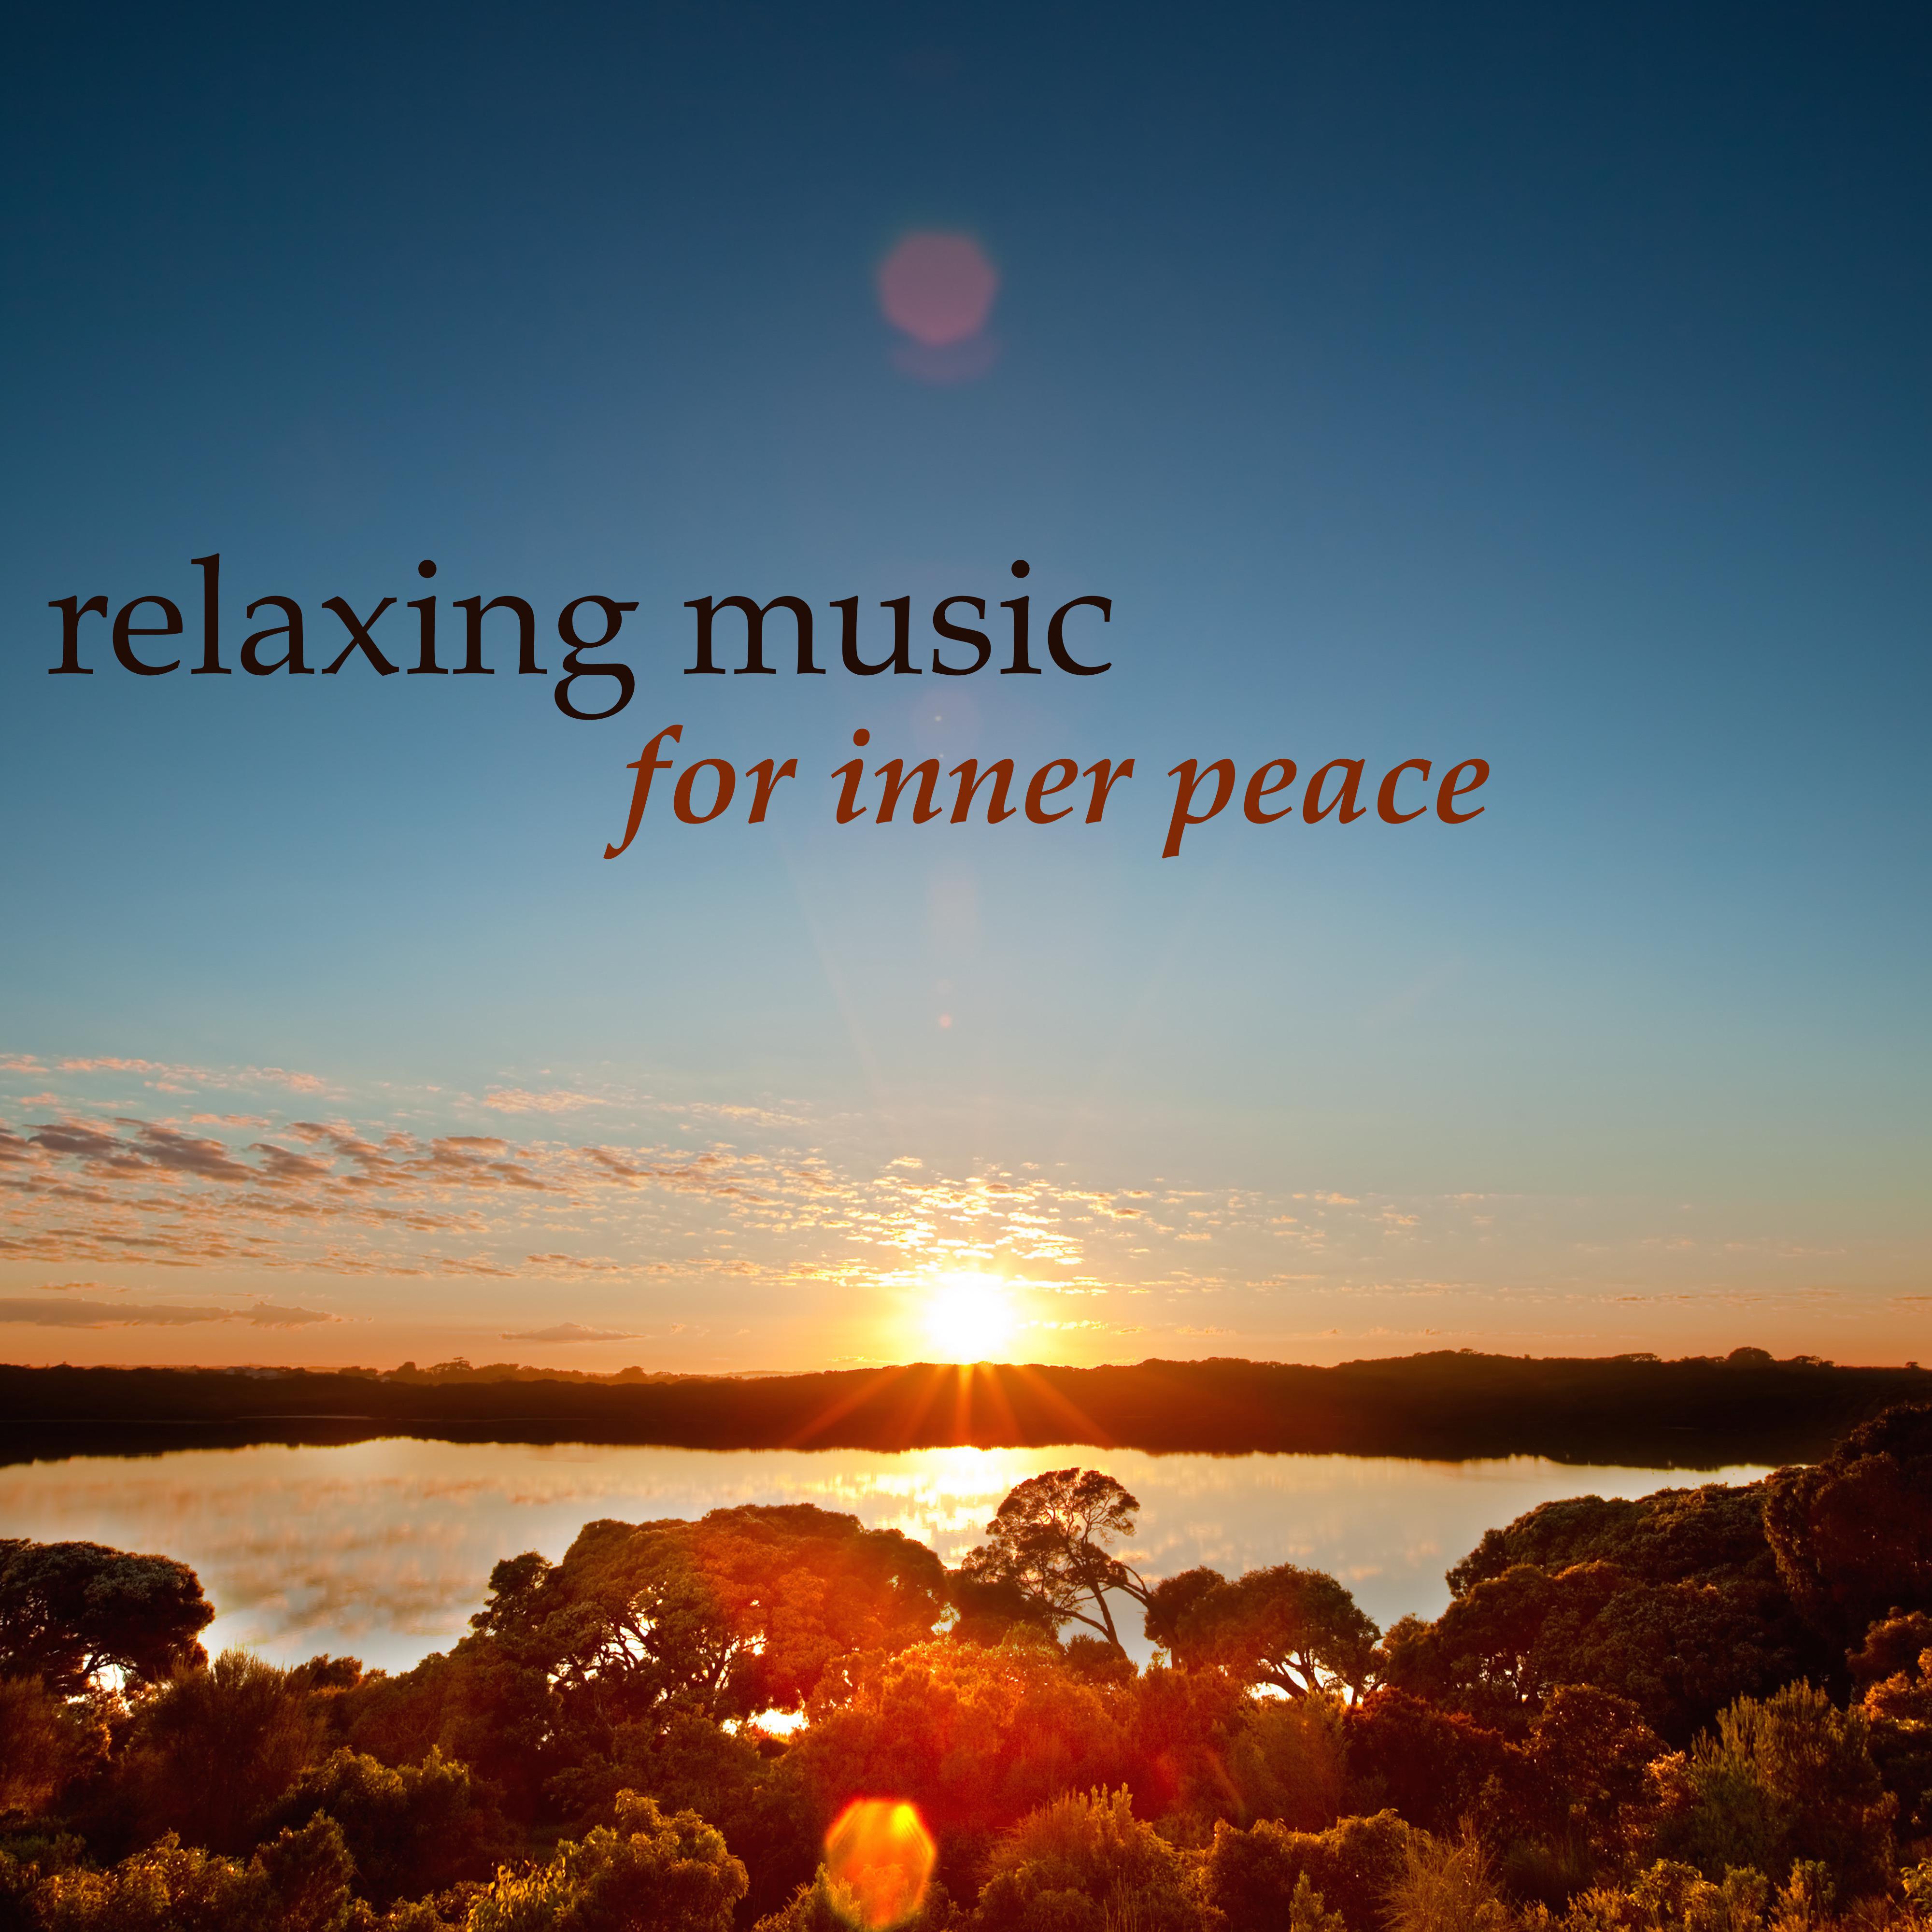 Meditation Music for Relaxing Mindfulness - Meditation Songs and Soothing Sounds of Nature Collection